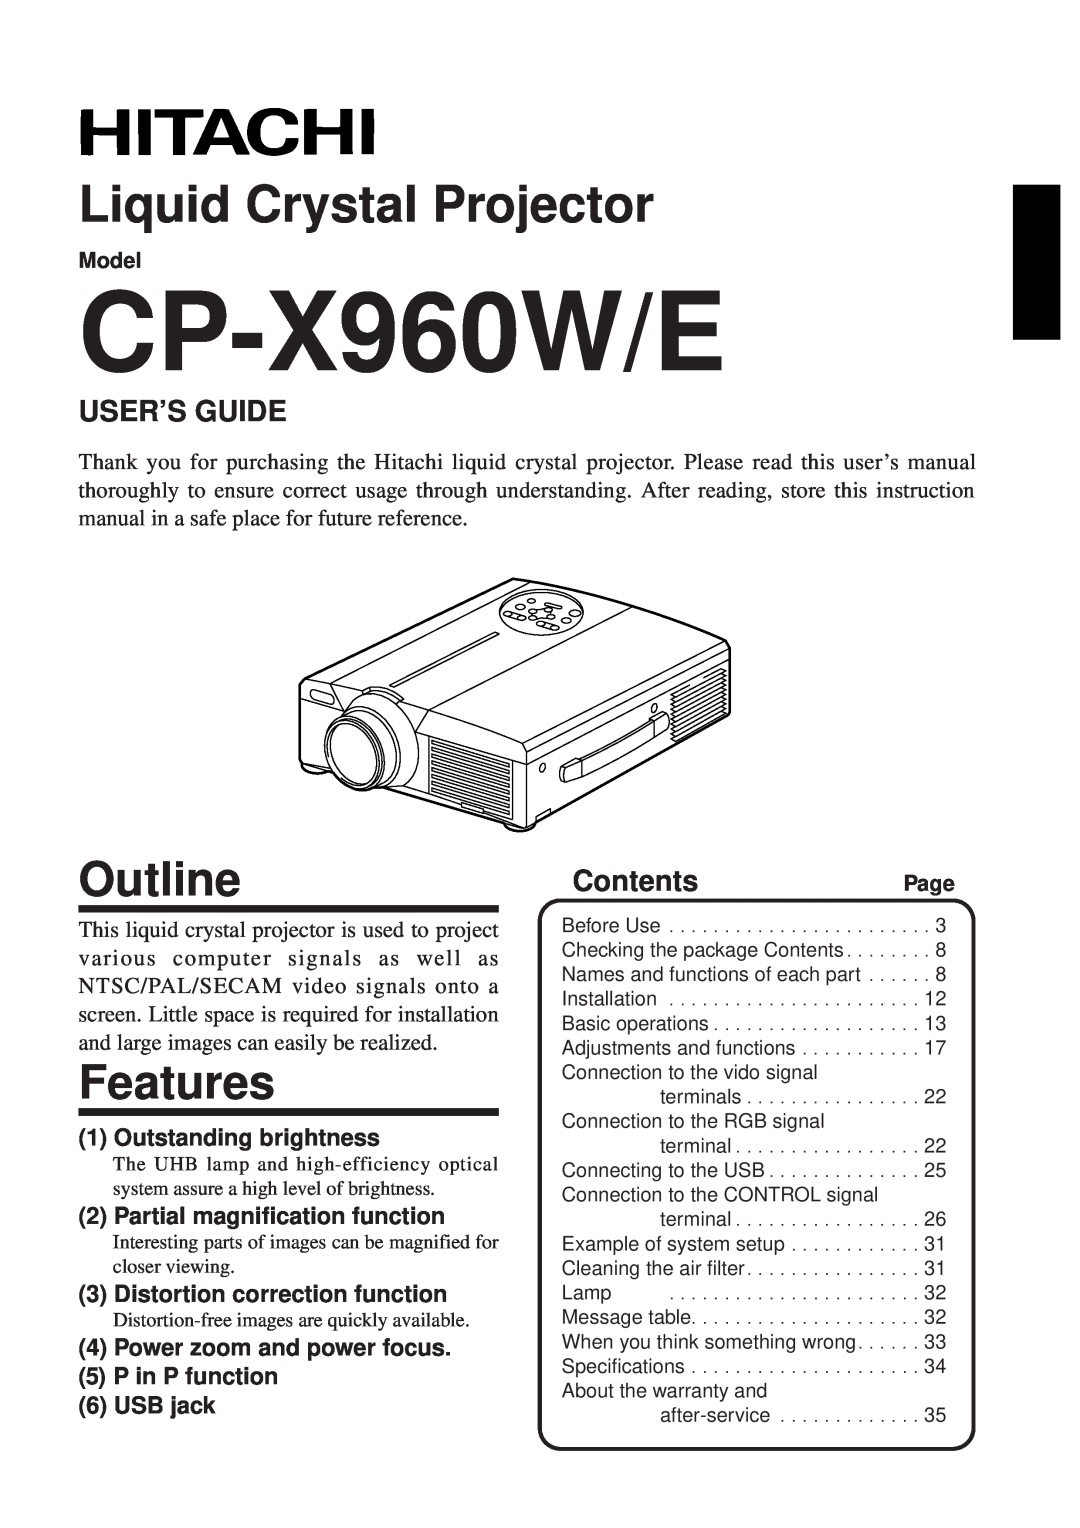 Hitachi user manual Outline, Features, User’S Guide, ContentsPage, Model, CP-X960W/E, Liquid Crystal Projector 